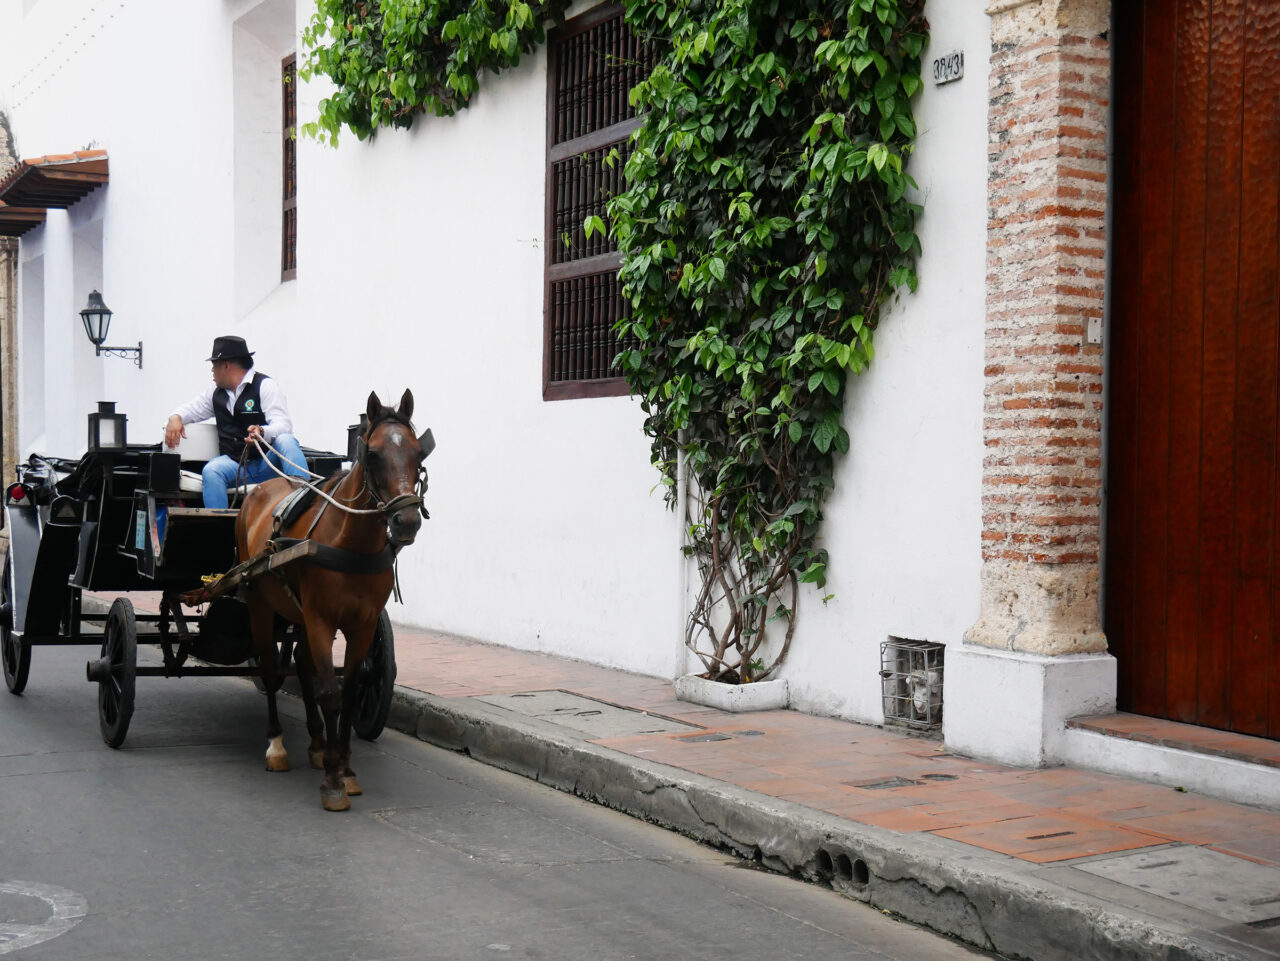 Horse and carriage in Cartagena, Colombia